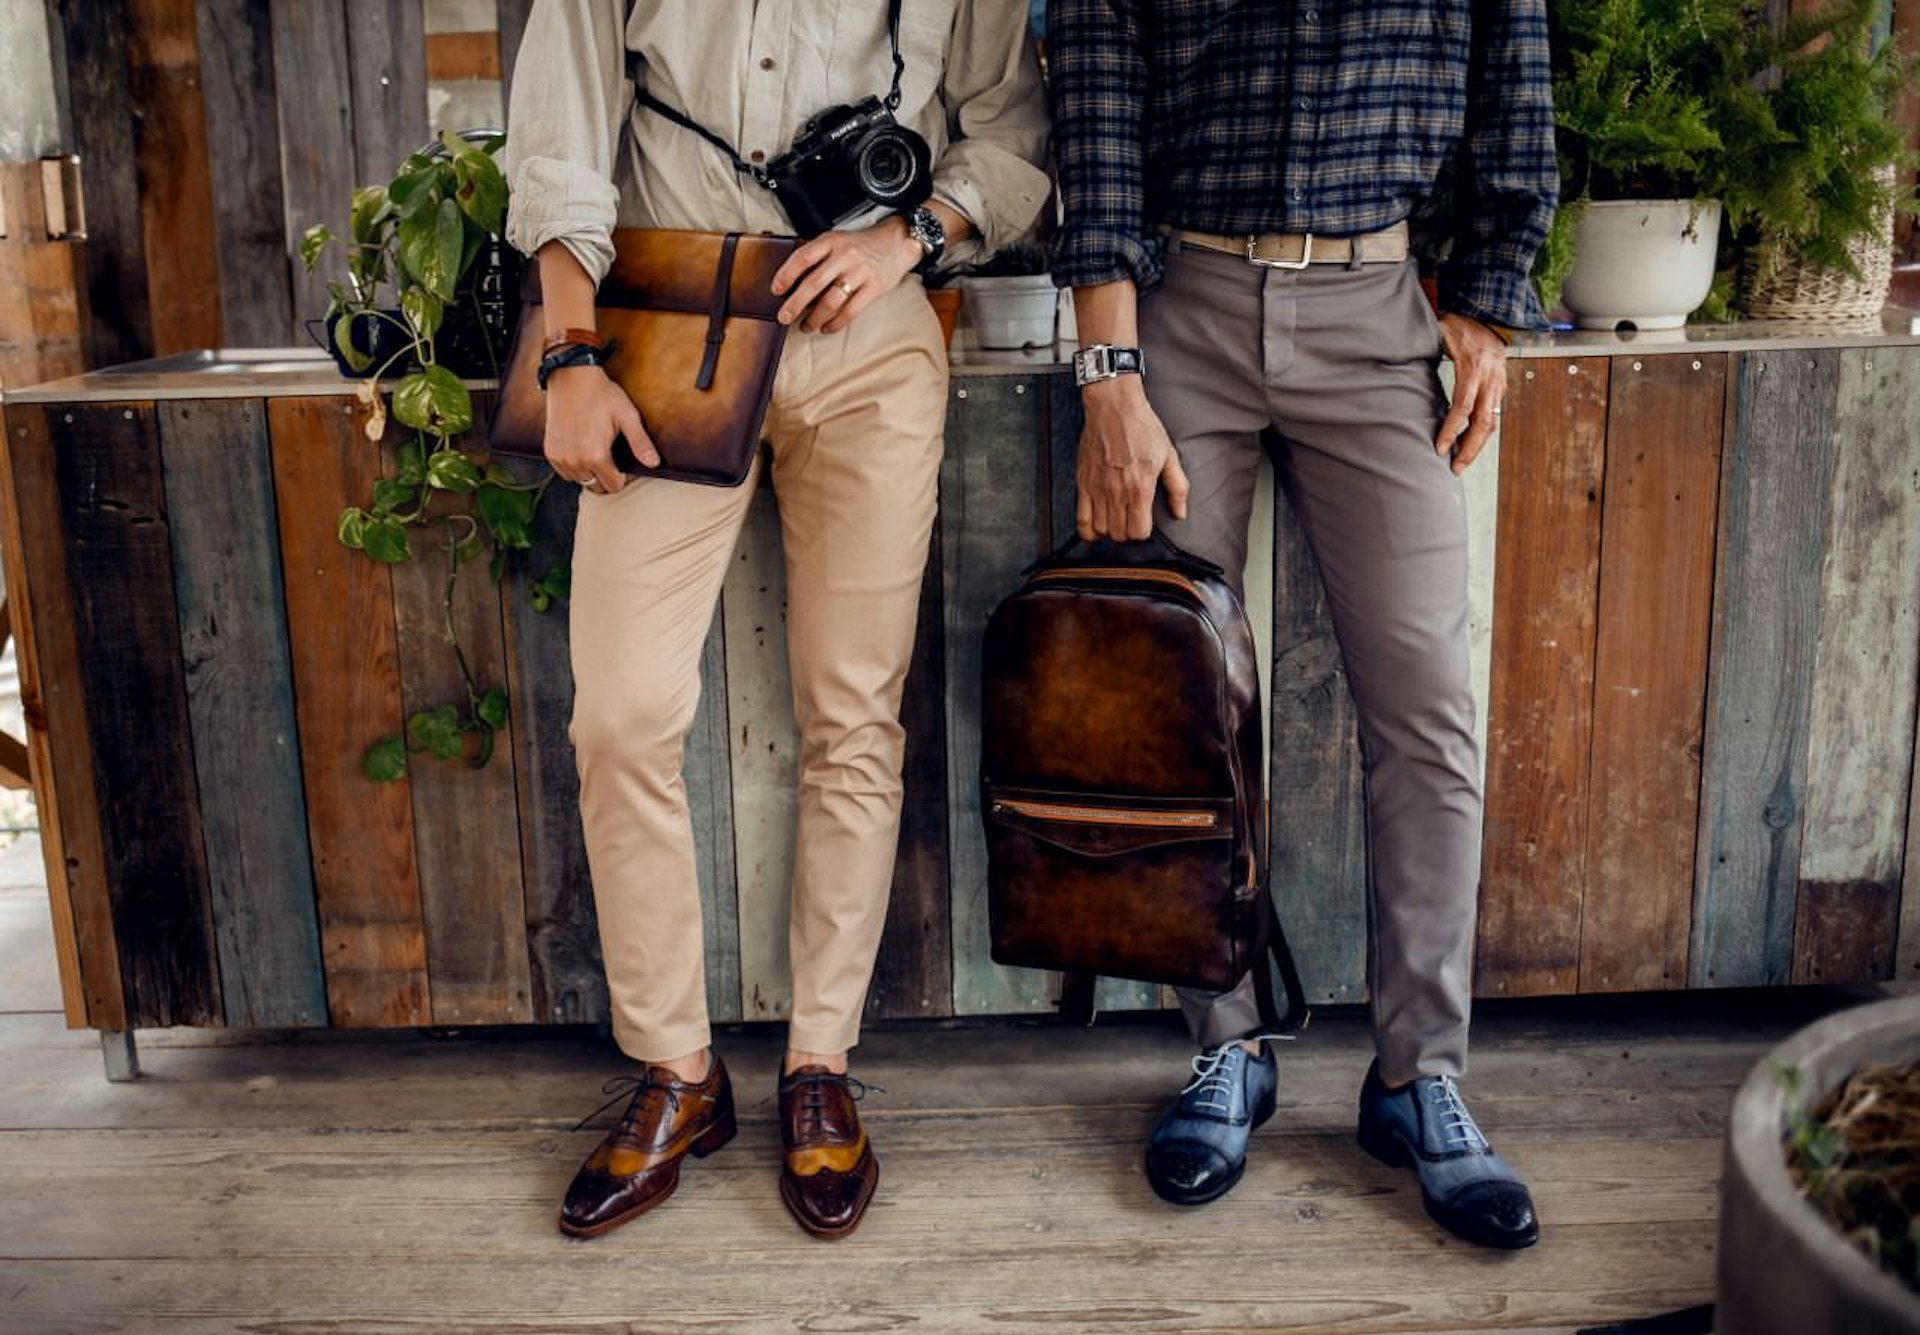 The legs and mid-sections of two men, each wearing neutral coloured slacks and white/checked shirts, and fine leather shoes. Both men carry polished leather bags in this product shot from leather purveyor Dominique Saint Paul, a Vietnam-based designer.